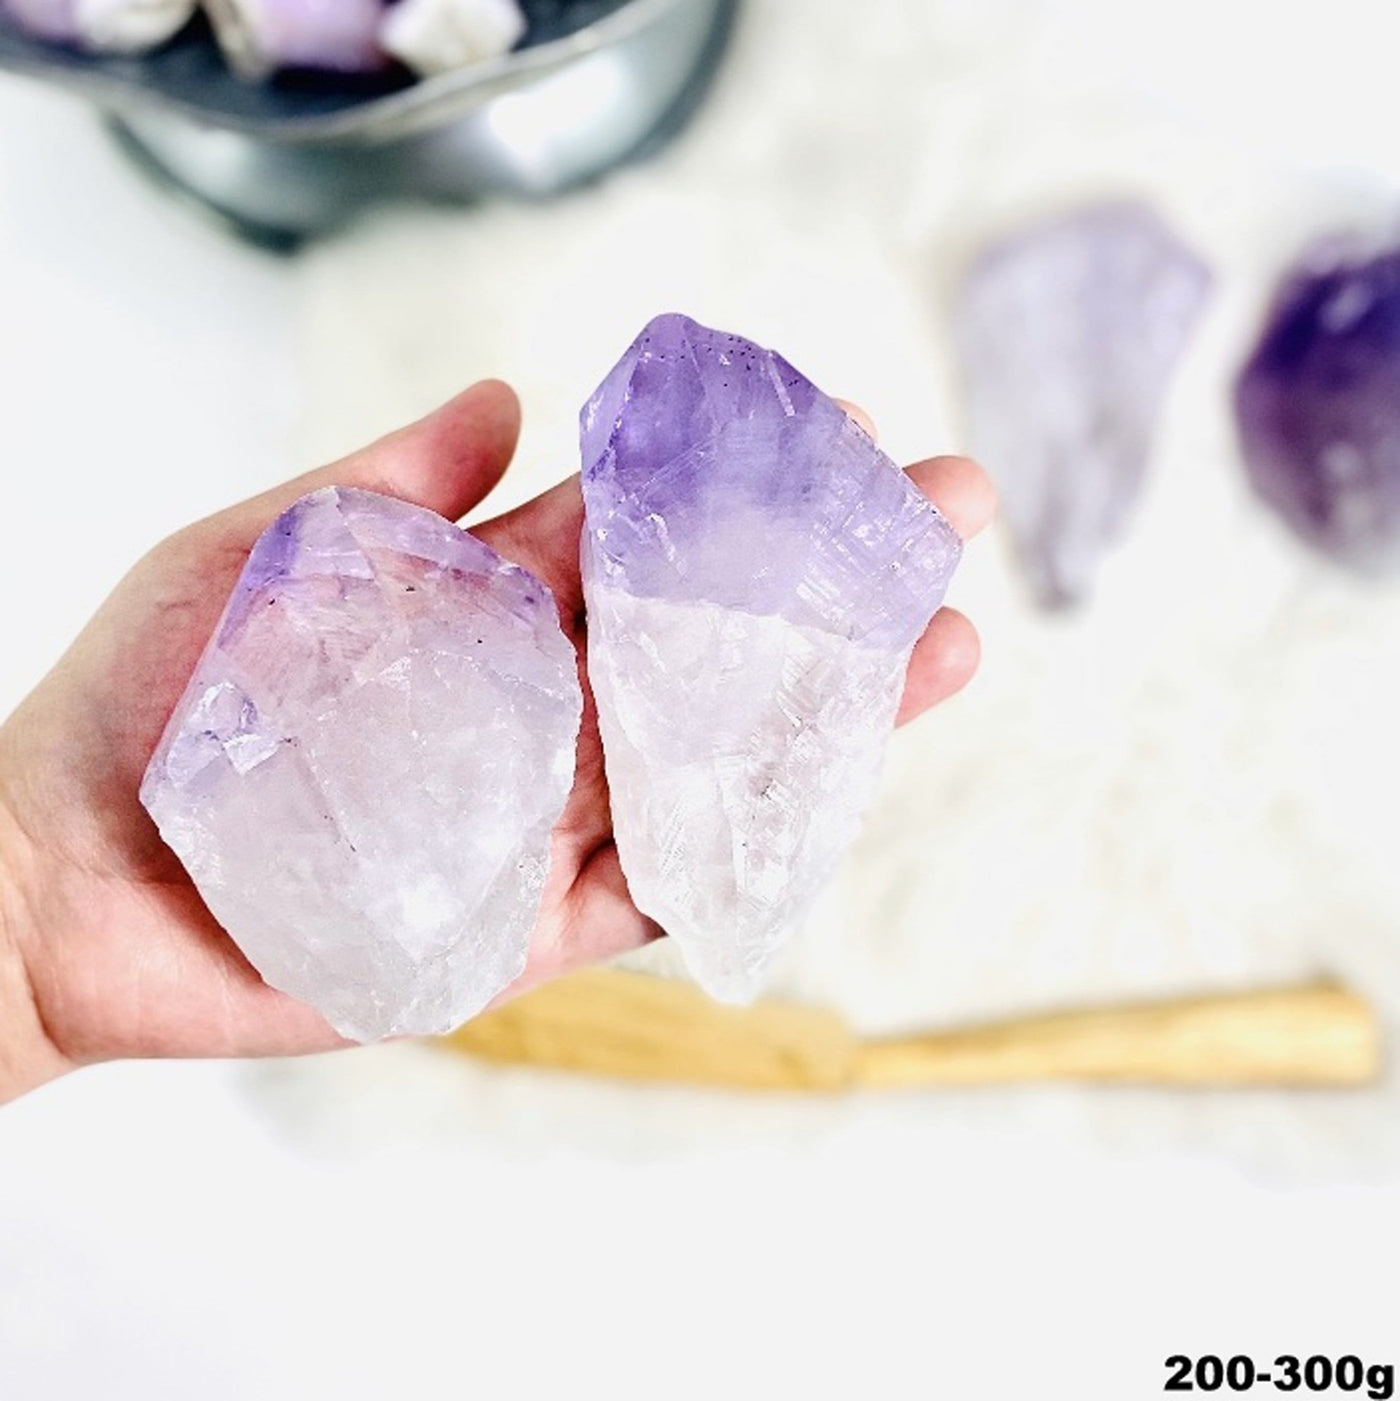 2 large amethyst points in a hand